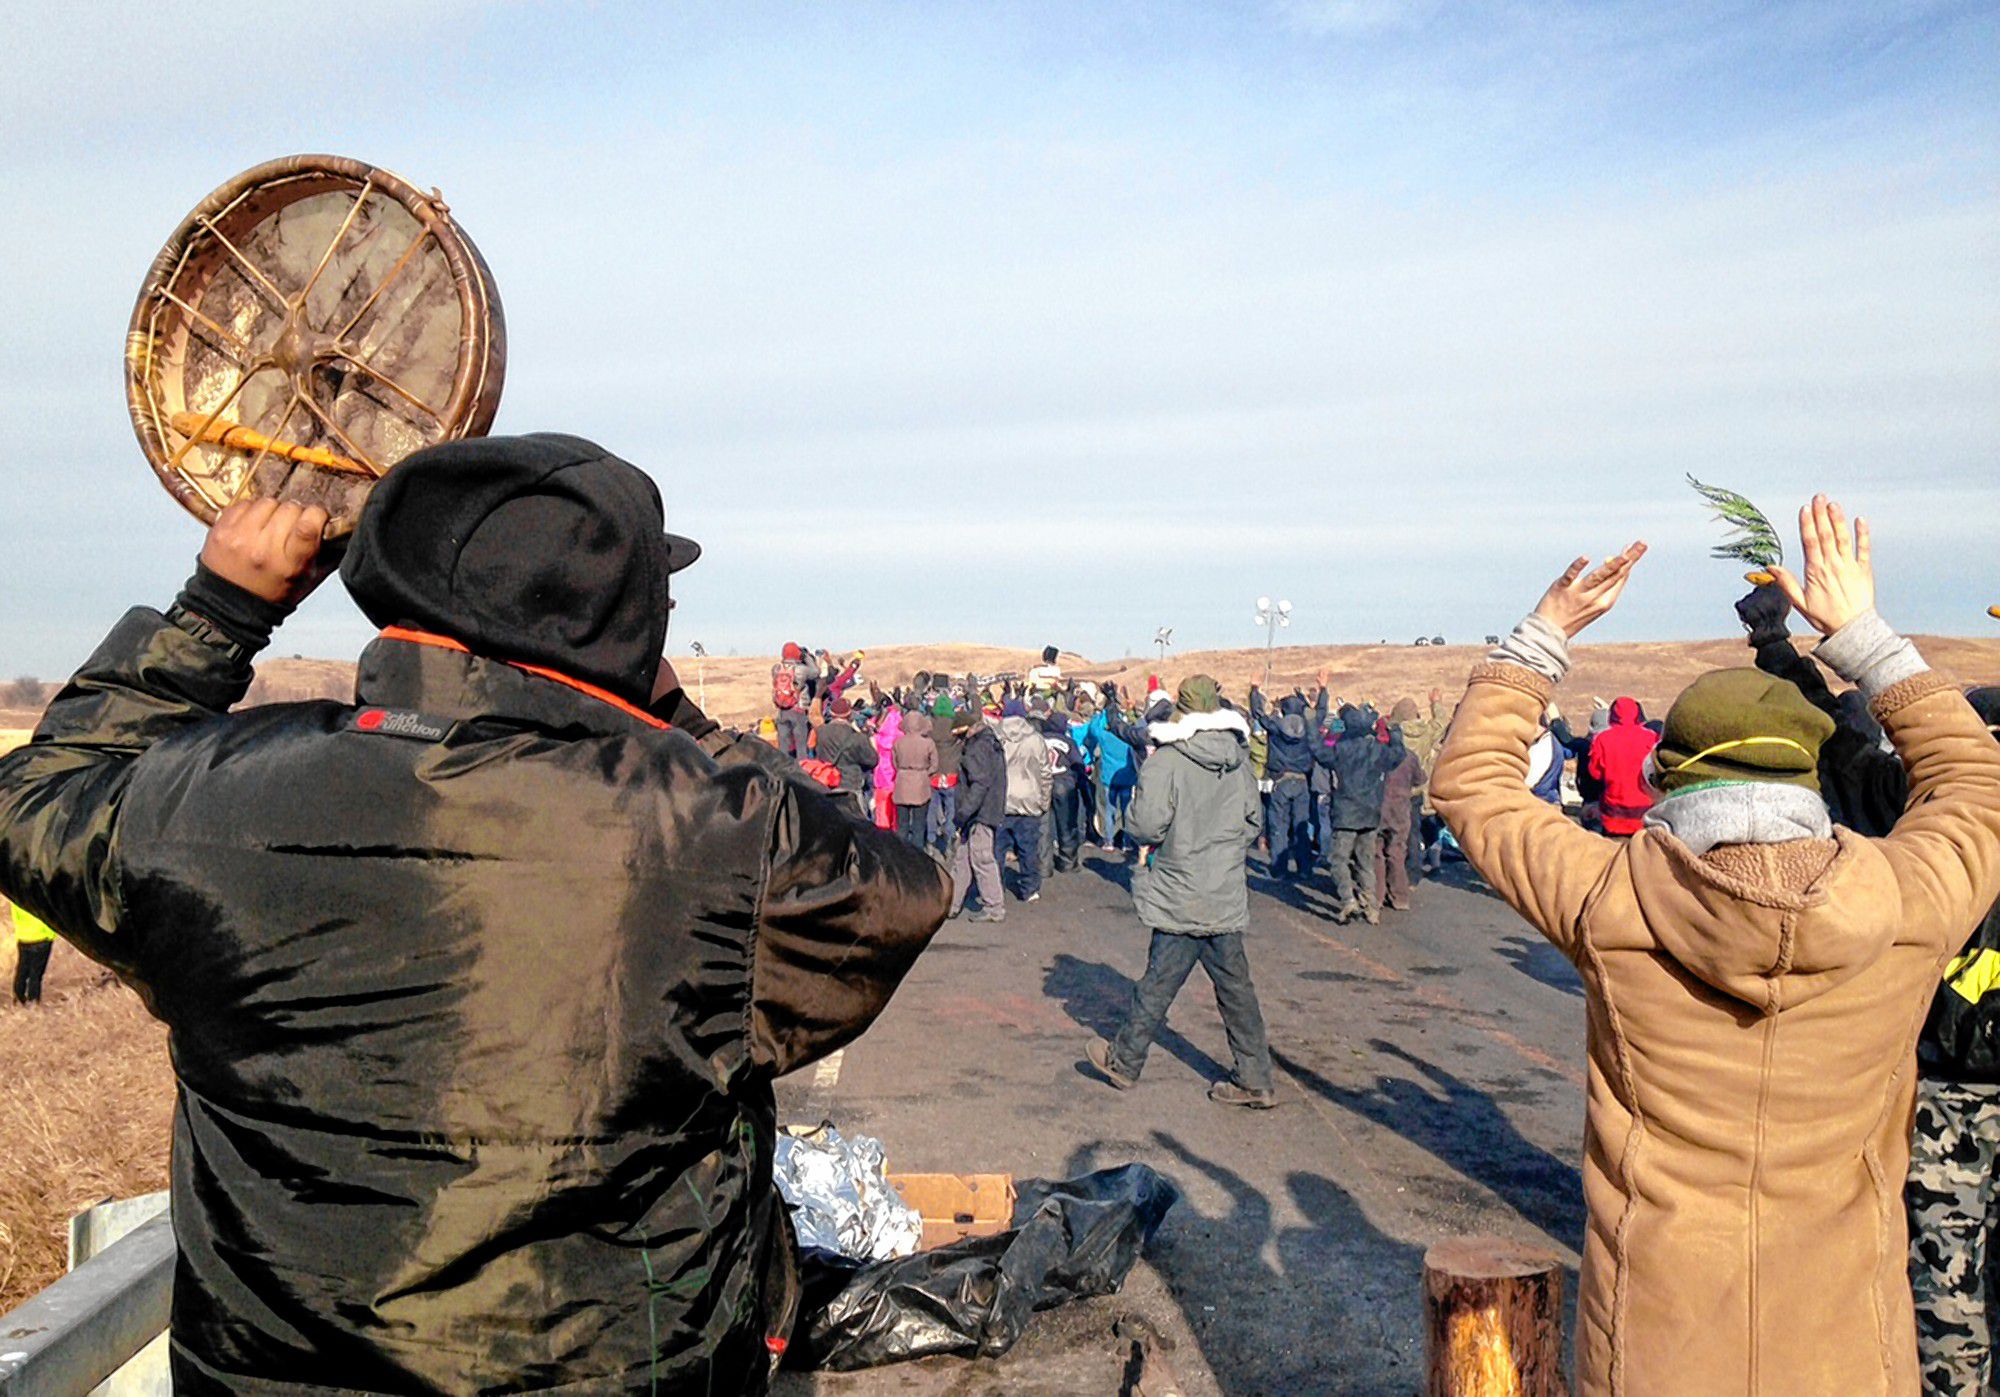 BTL: The North Dakota Pipeline Protest Asks What’s More Valuable, Water or Oil?